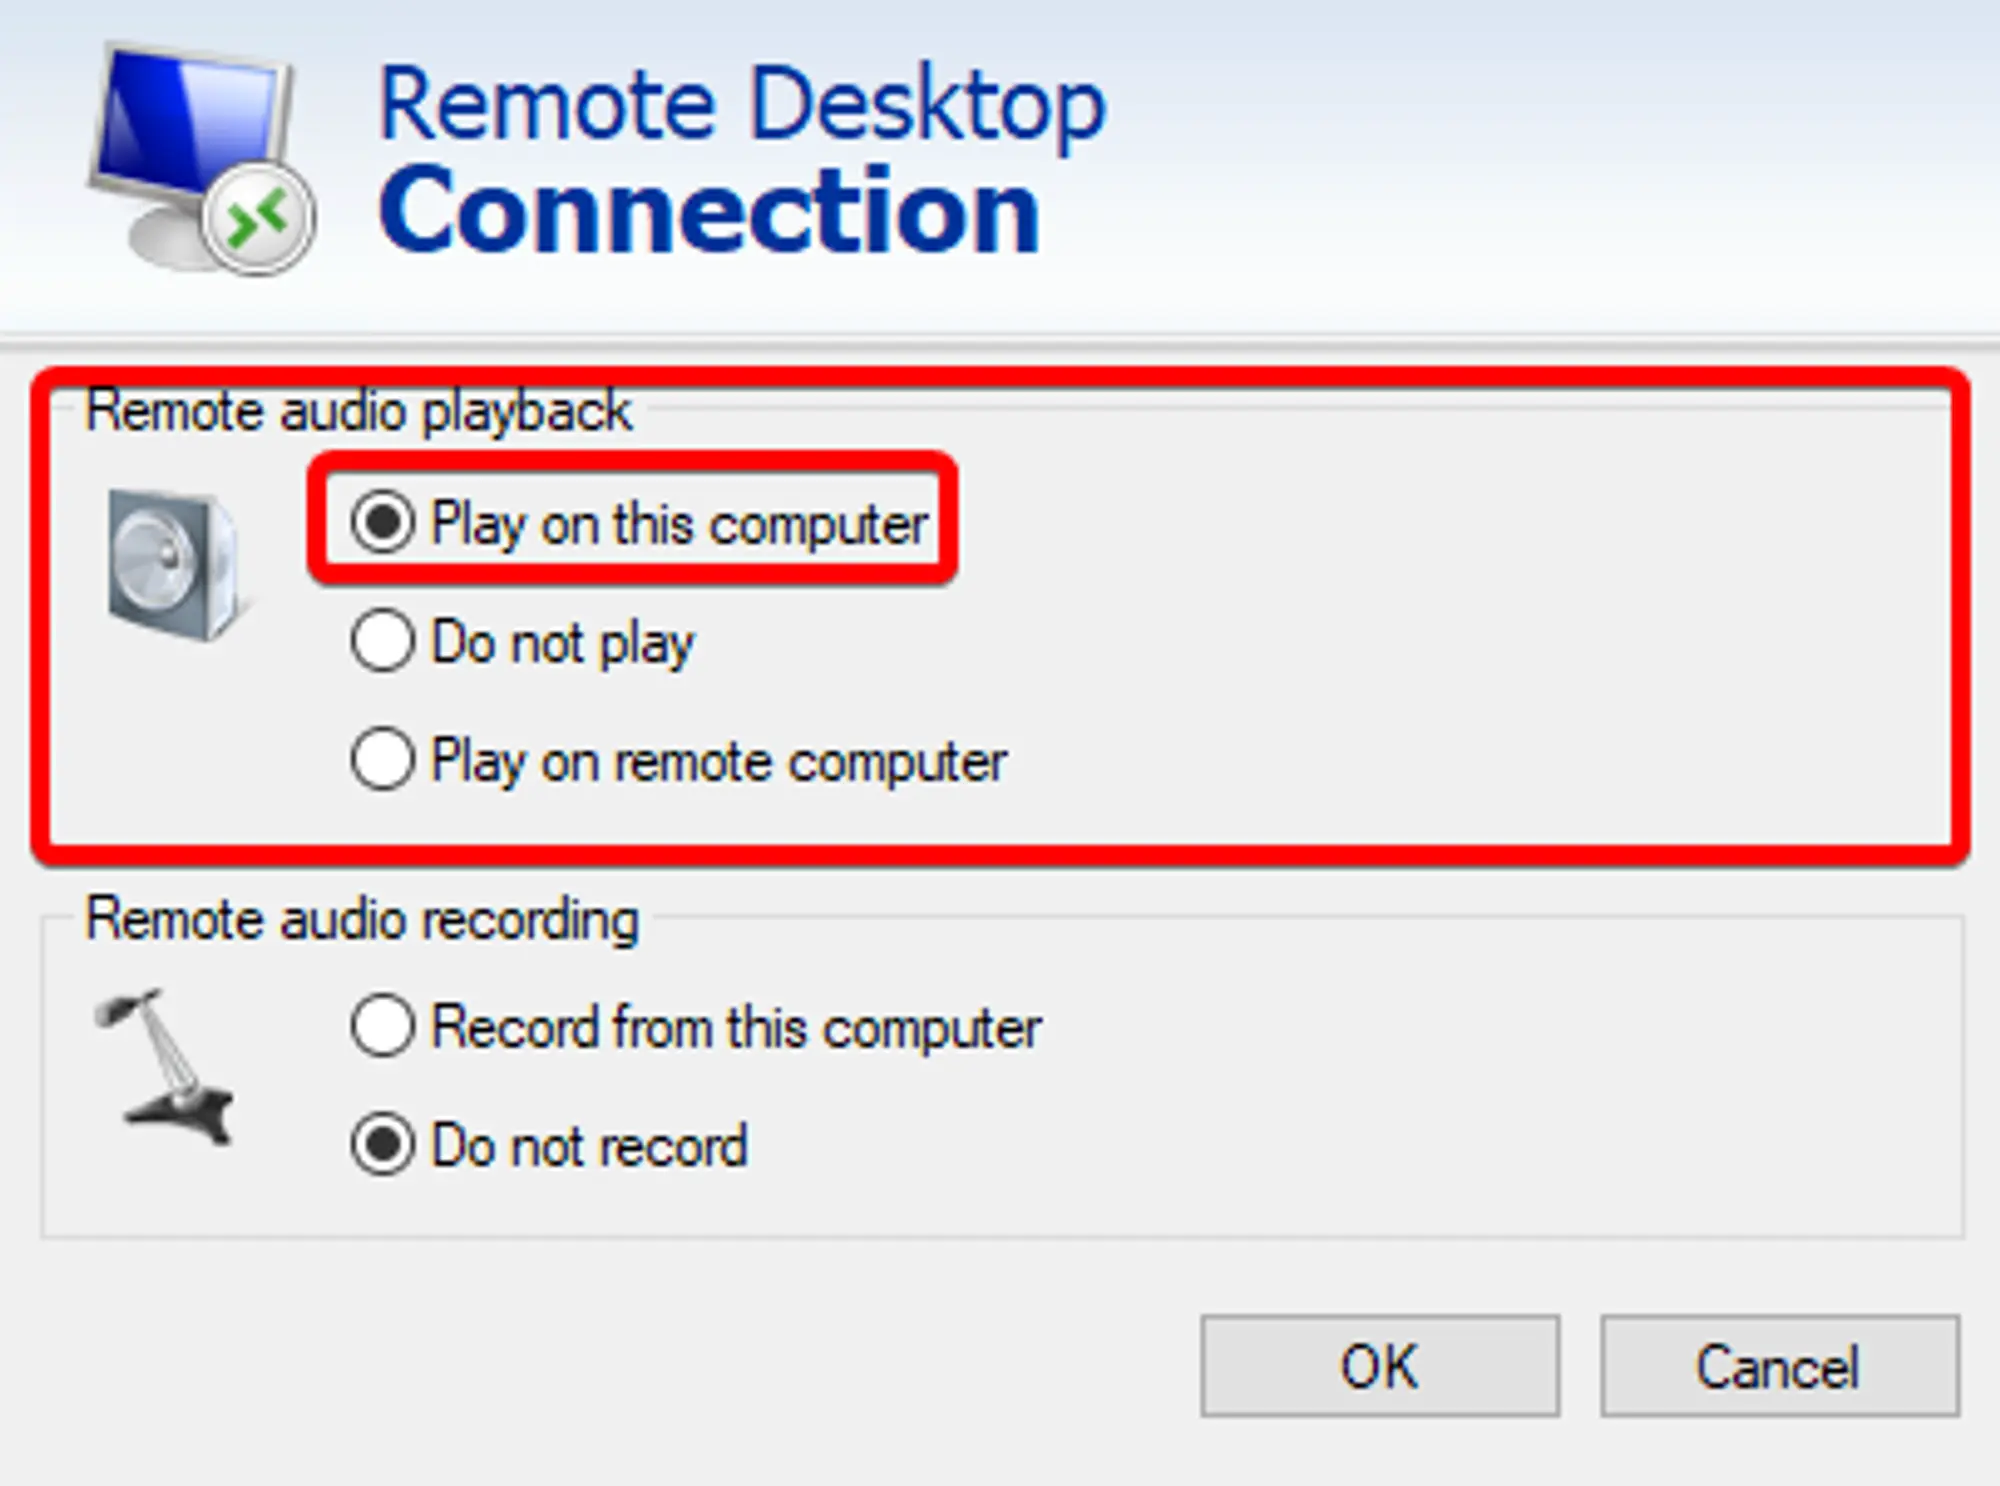 The Windows Remote Desktop Client’s “Remote Audio → Settings” window with the “Play on this computer” radio button selected. 